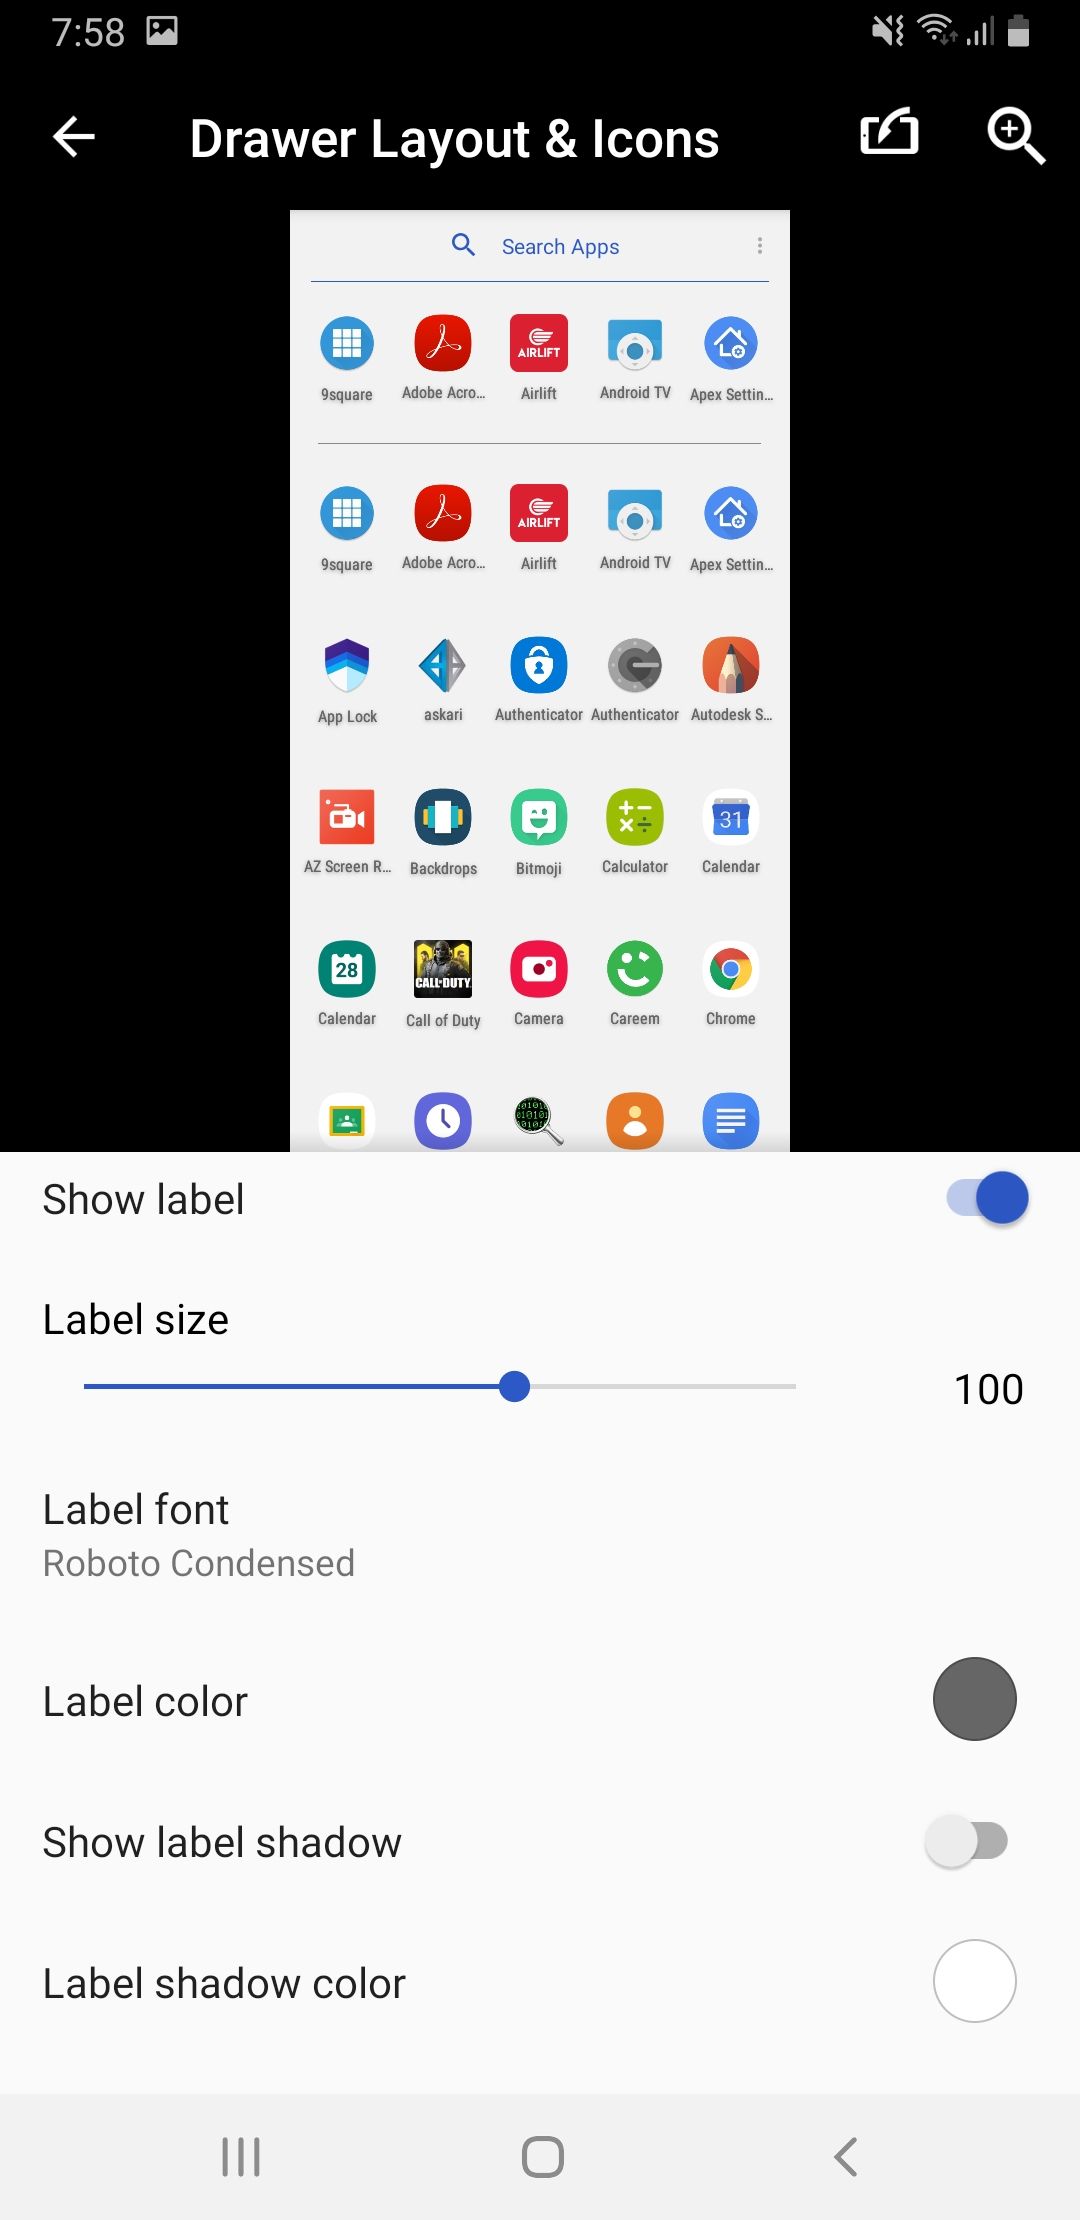 How to Install Fonts on Android 10